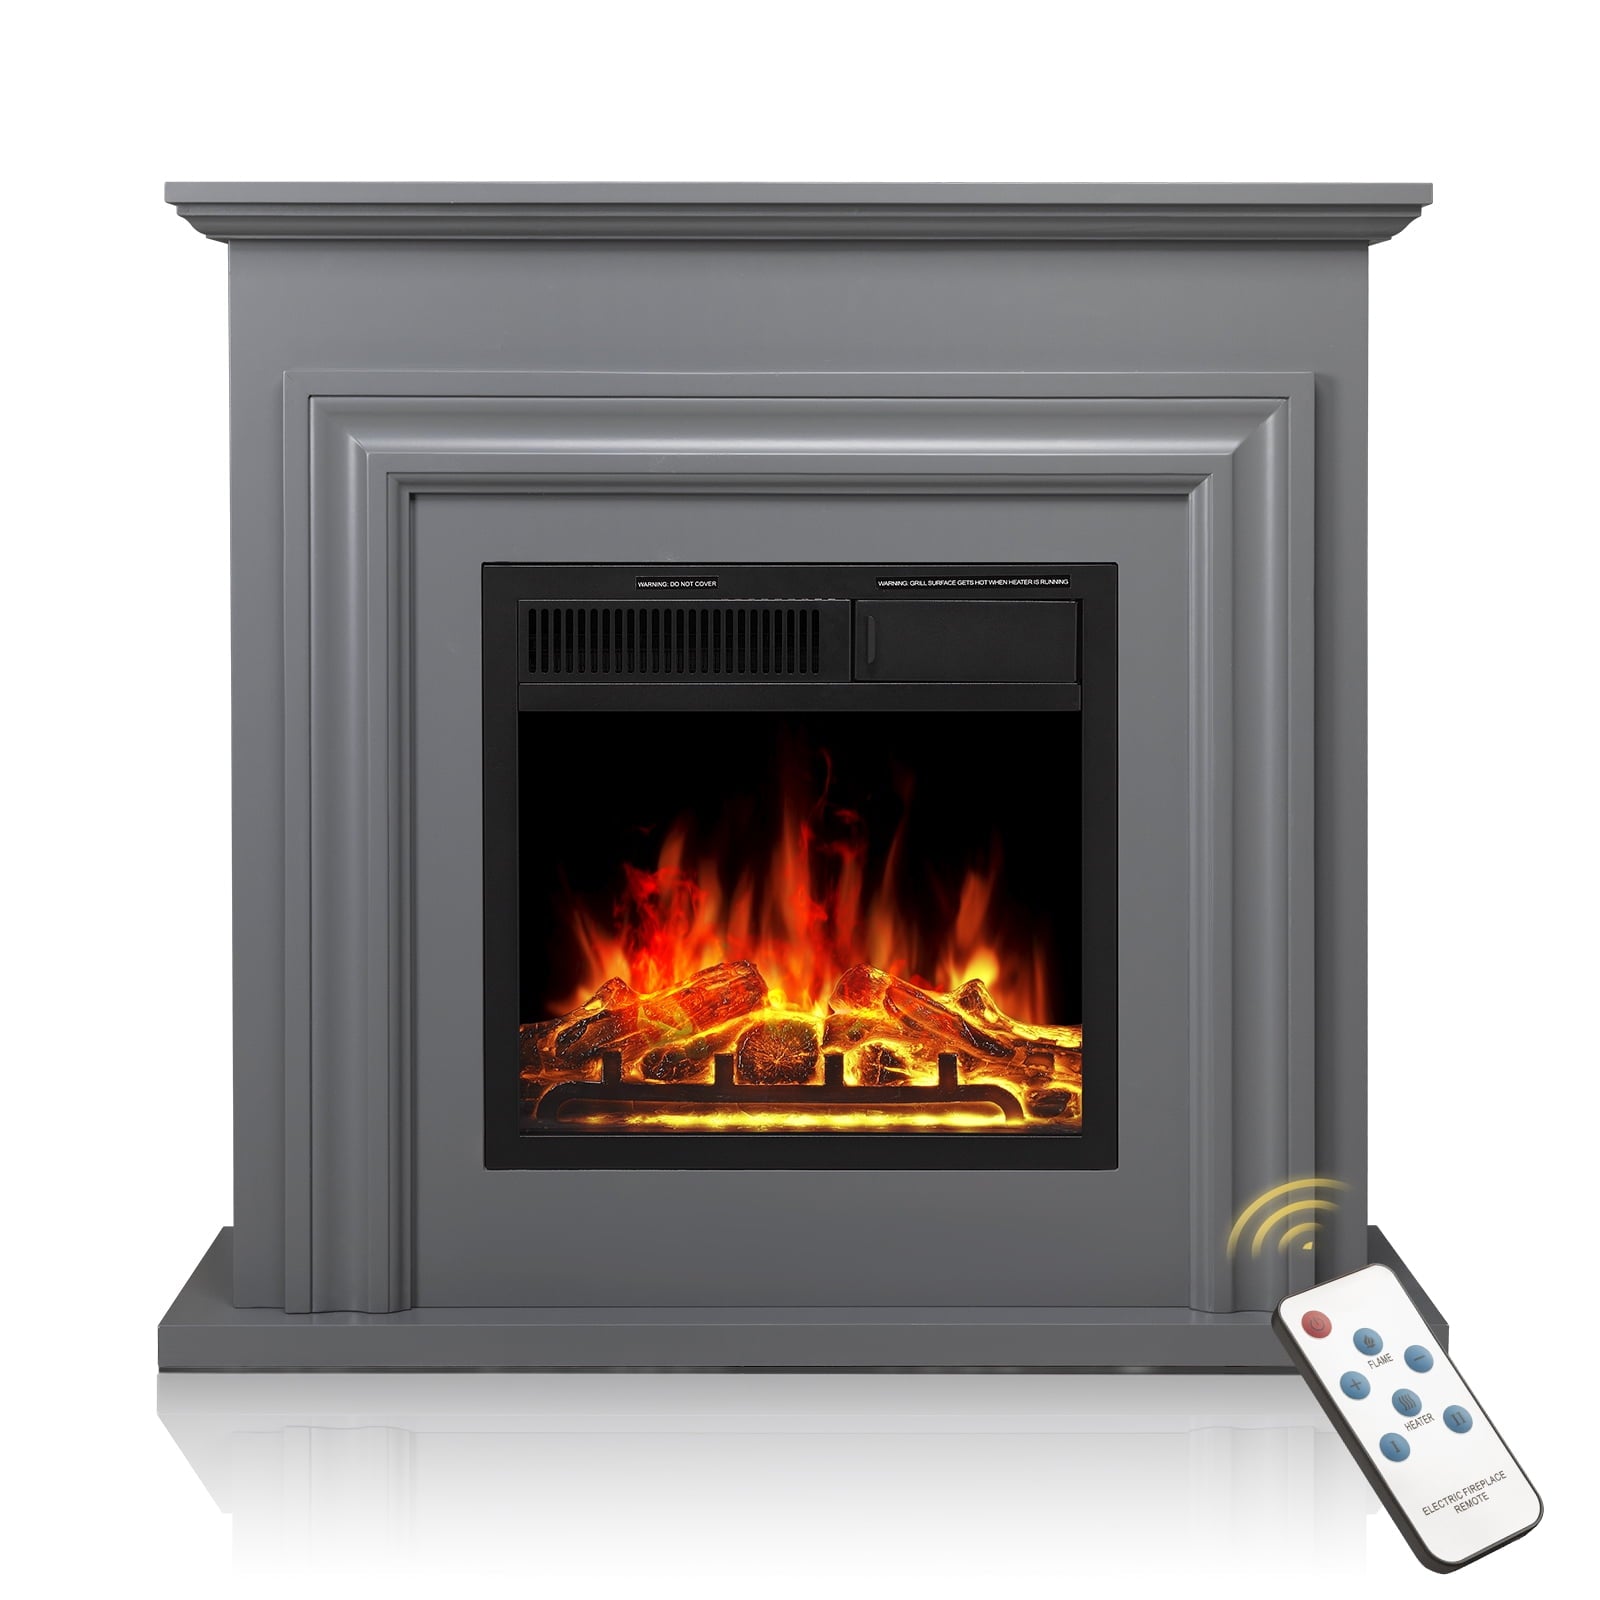 KISSAIR Electric Fireplace with Mantel Package Freestanding Fireplace Heater Corner Firebox with Log & Remote Control,750-1500W, Grey